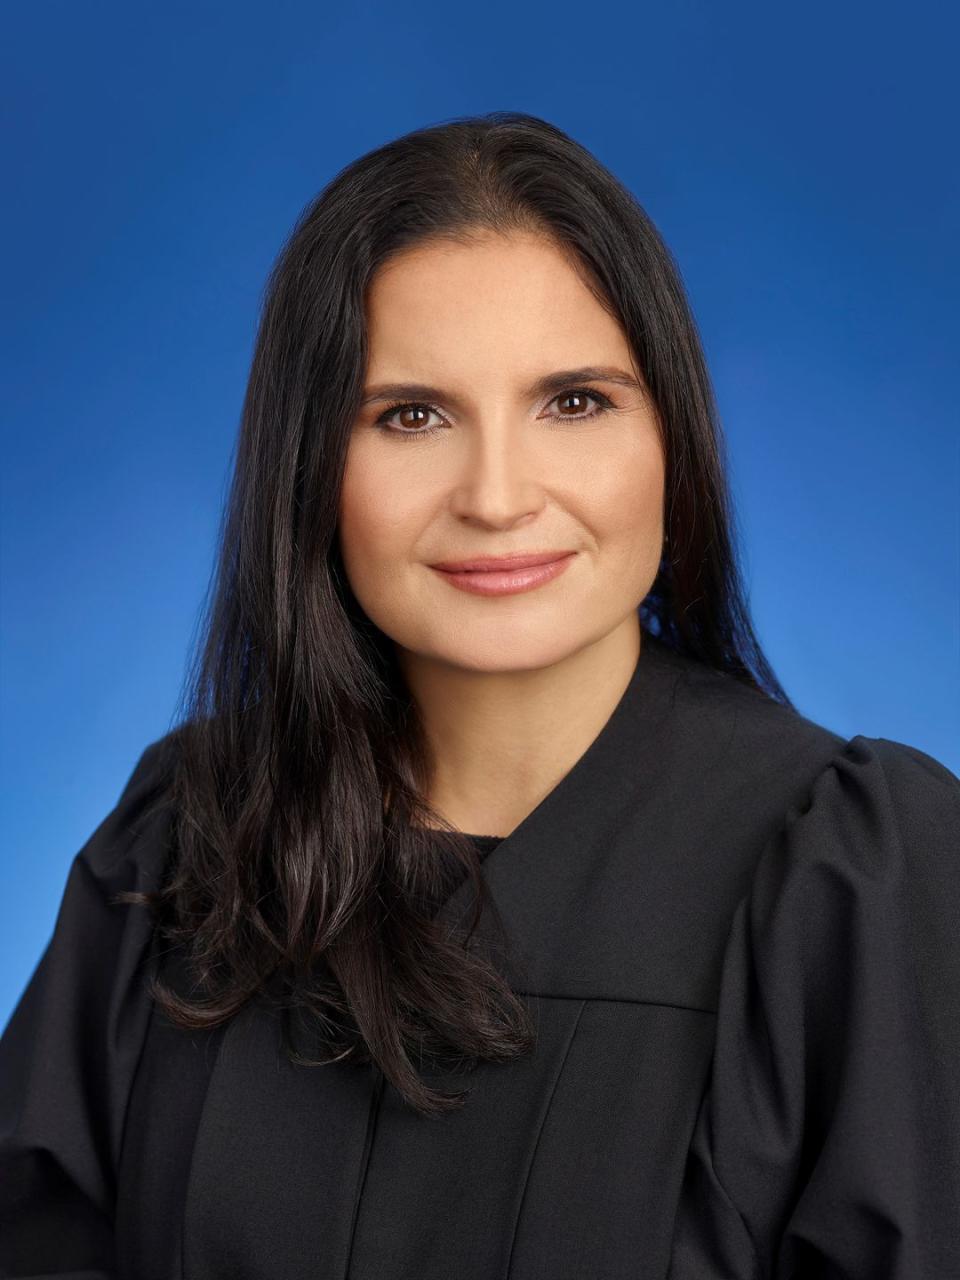 aileen cannon, wearing black judge robes, looking straight ahead at the camera, with a blue backdrop behind her